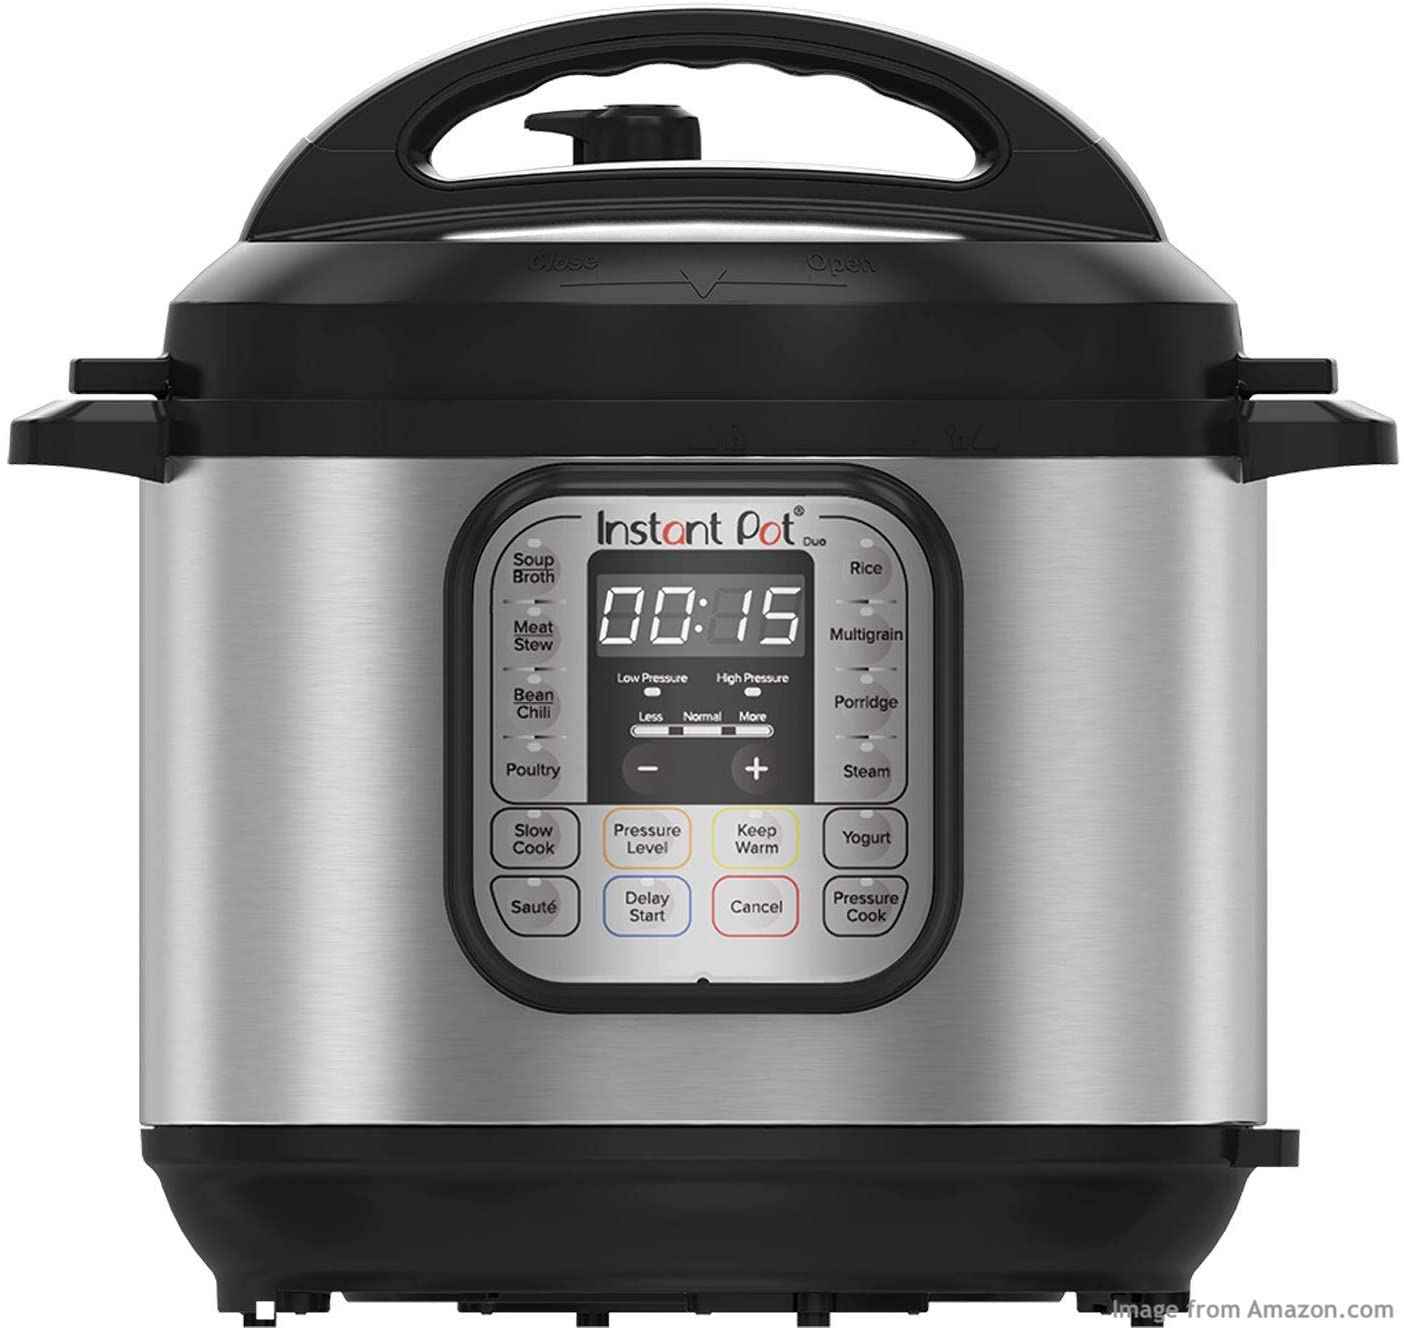 Is the Instant Pot the best electric pressure cooker? Read our review here.